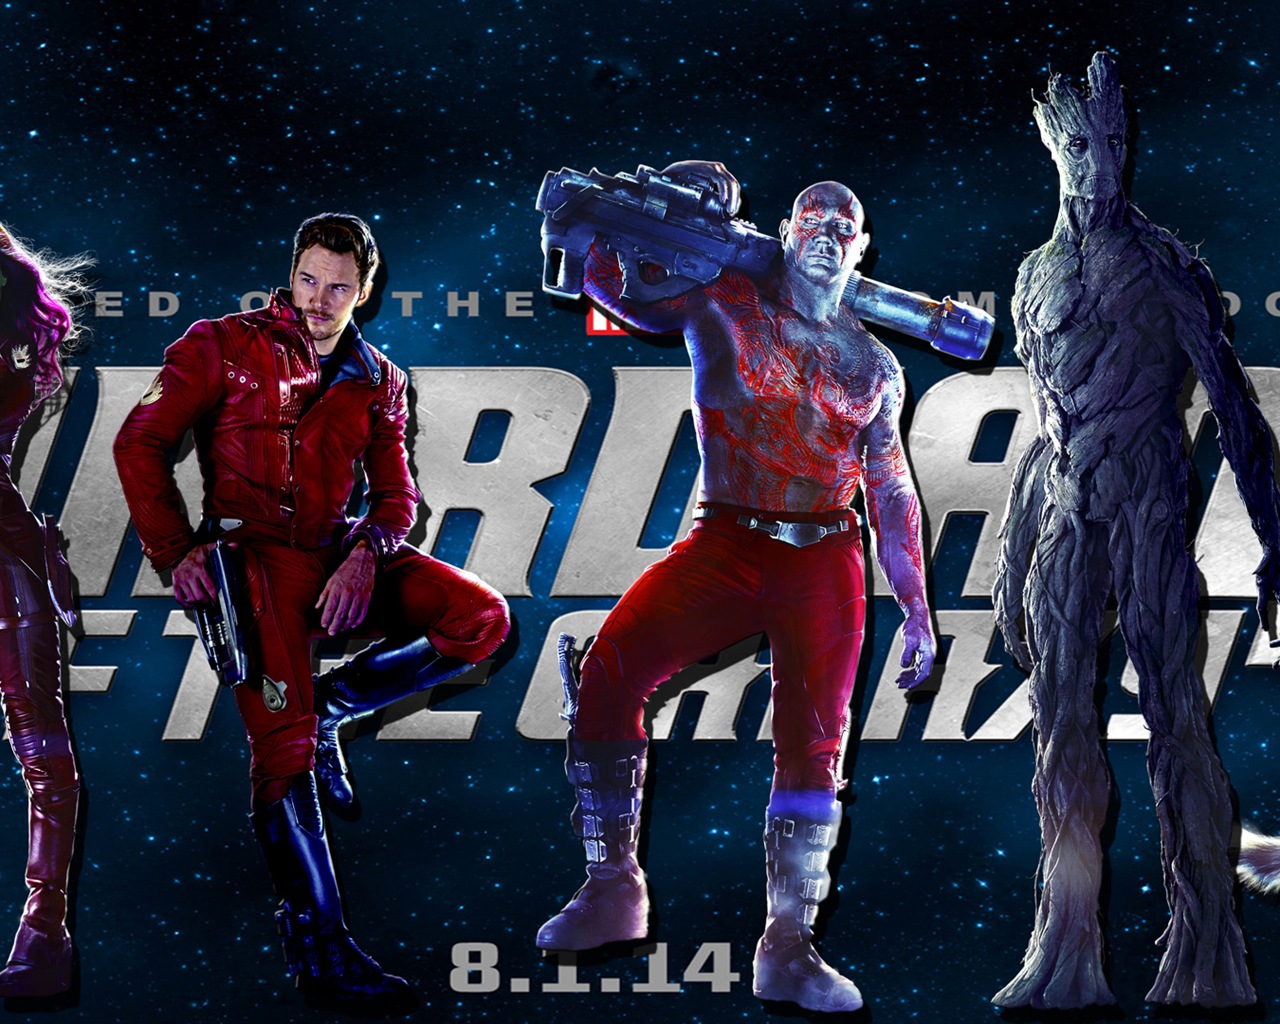 Guardians of the Galaxy 2014 HD movie wallpapers #3 - 1280x1024